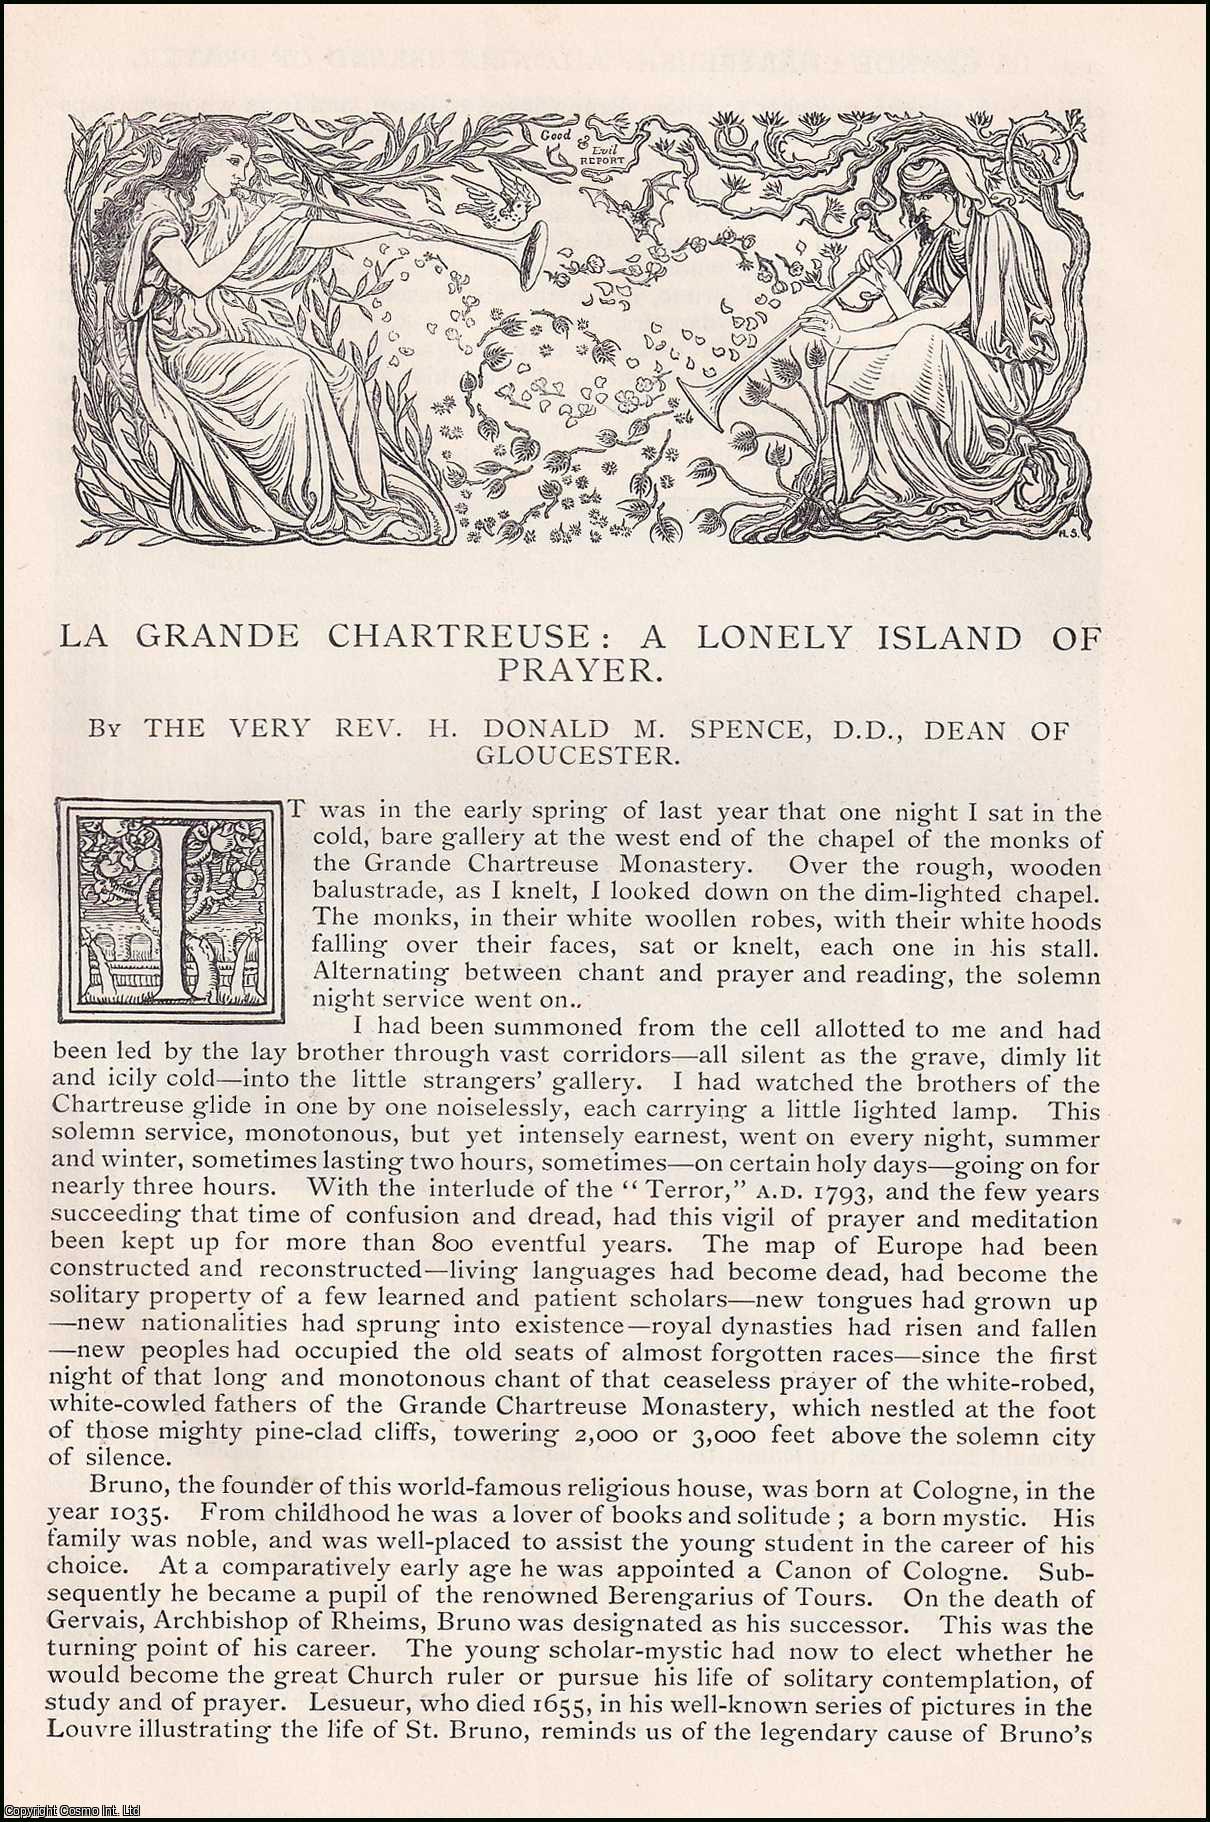 Rev. H. Donald M. Spence - La Grande Chartreuse Monastery: a Lonely Island of Prayer. An original article from the English Illustrated Magazine, 1891.